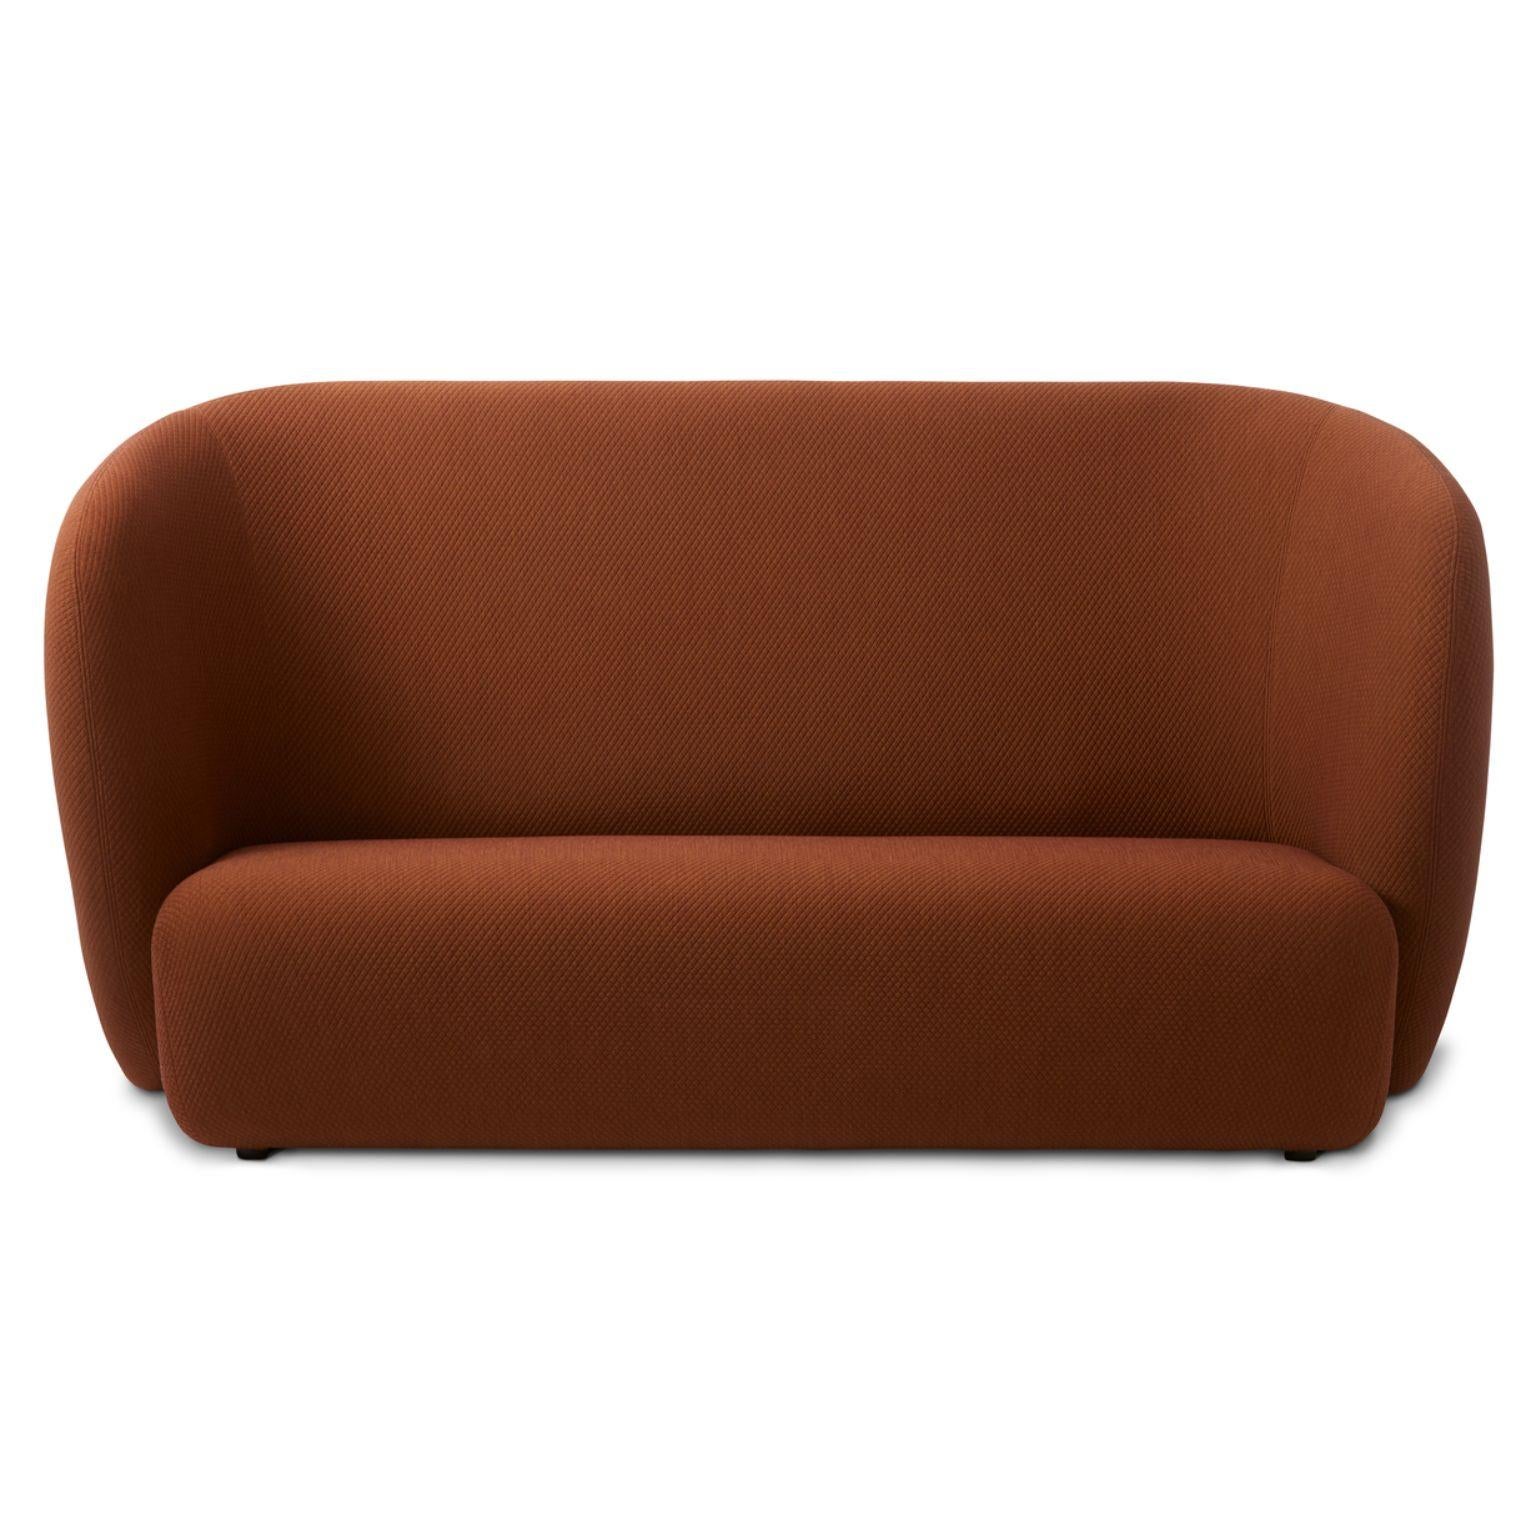 Haven 3 Seater Mosaic Spicy Brown by Warm Nordic
Dimensions: D220 x W84 x H 110/40 cm
Material: Textile upholstery, Foam, Spring system, Wood
Weight: 84 kg
Also available in different colours and finishes. Please contact us.

Haven is a